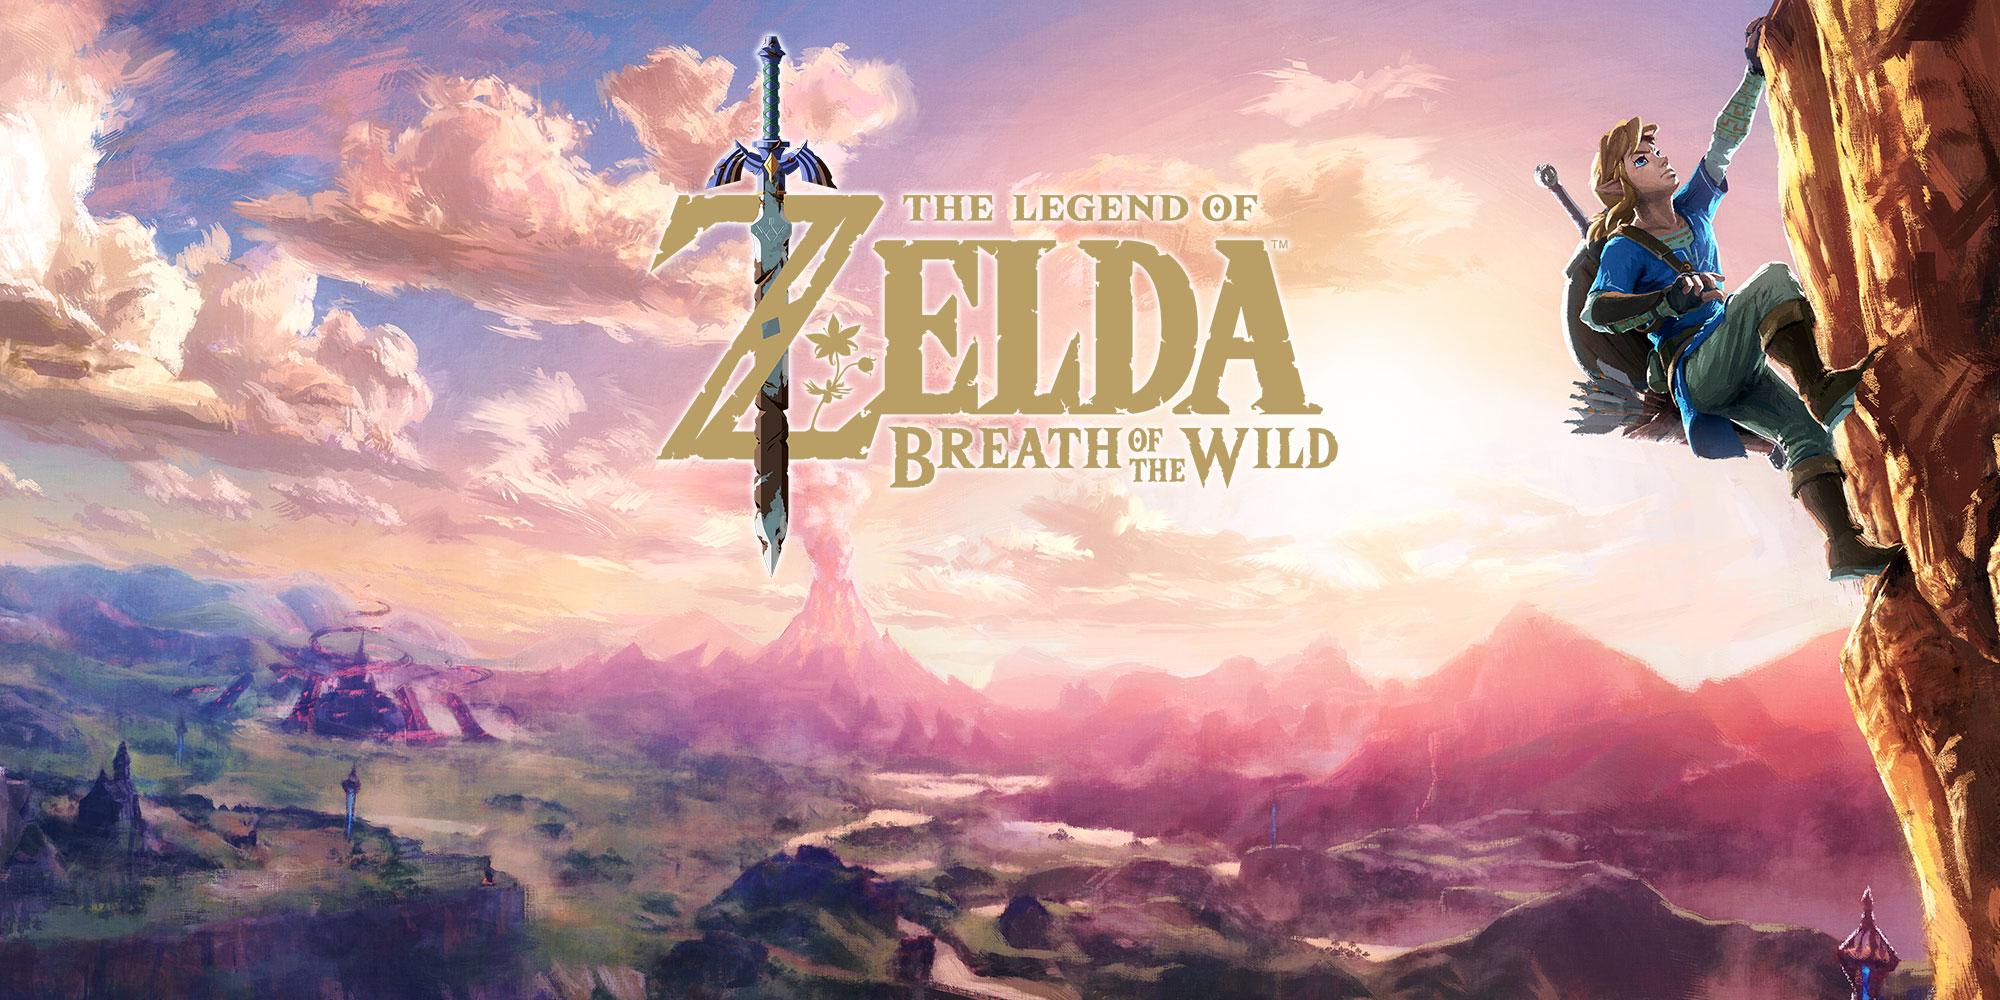 The Legend Of Zelda Breath Of The Wild Including The Champion's Ballad DLC Free Download